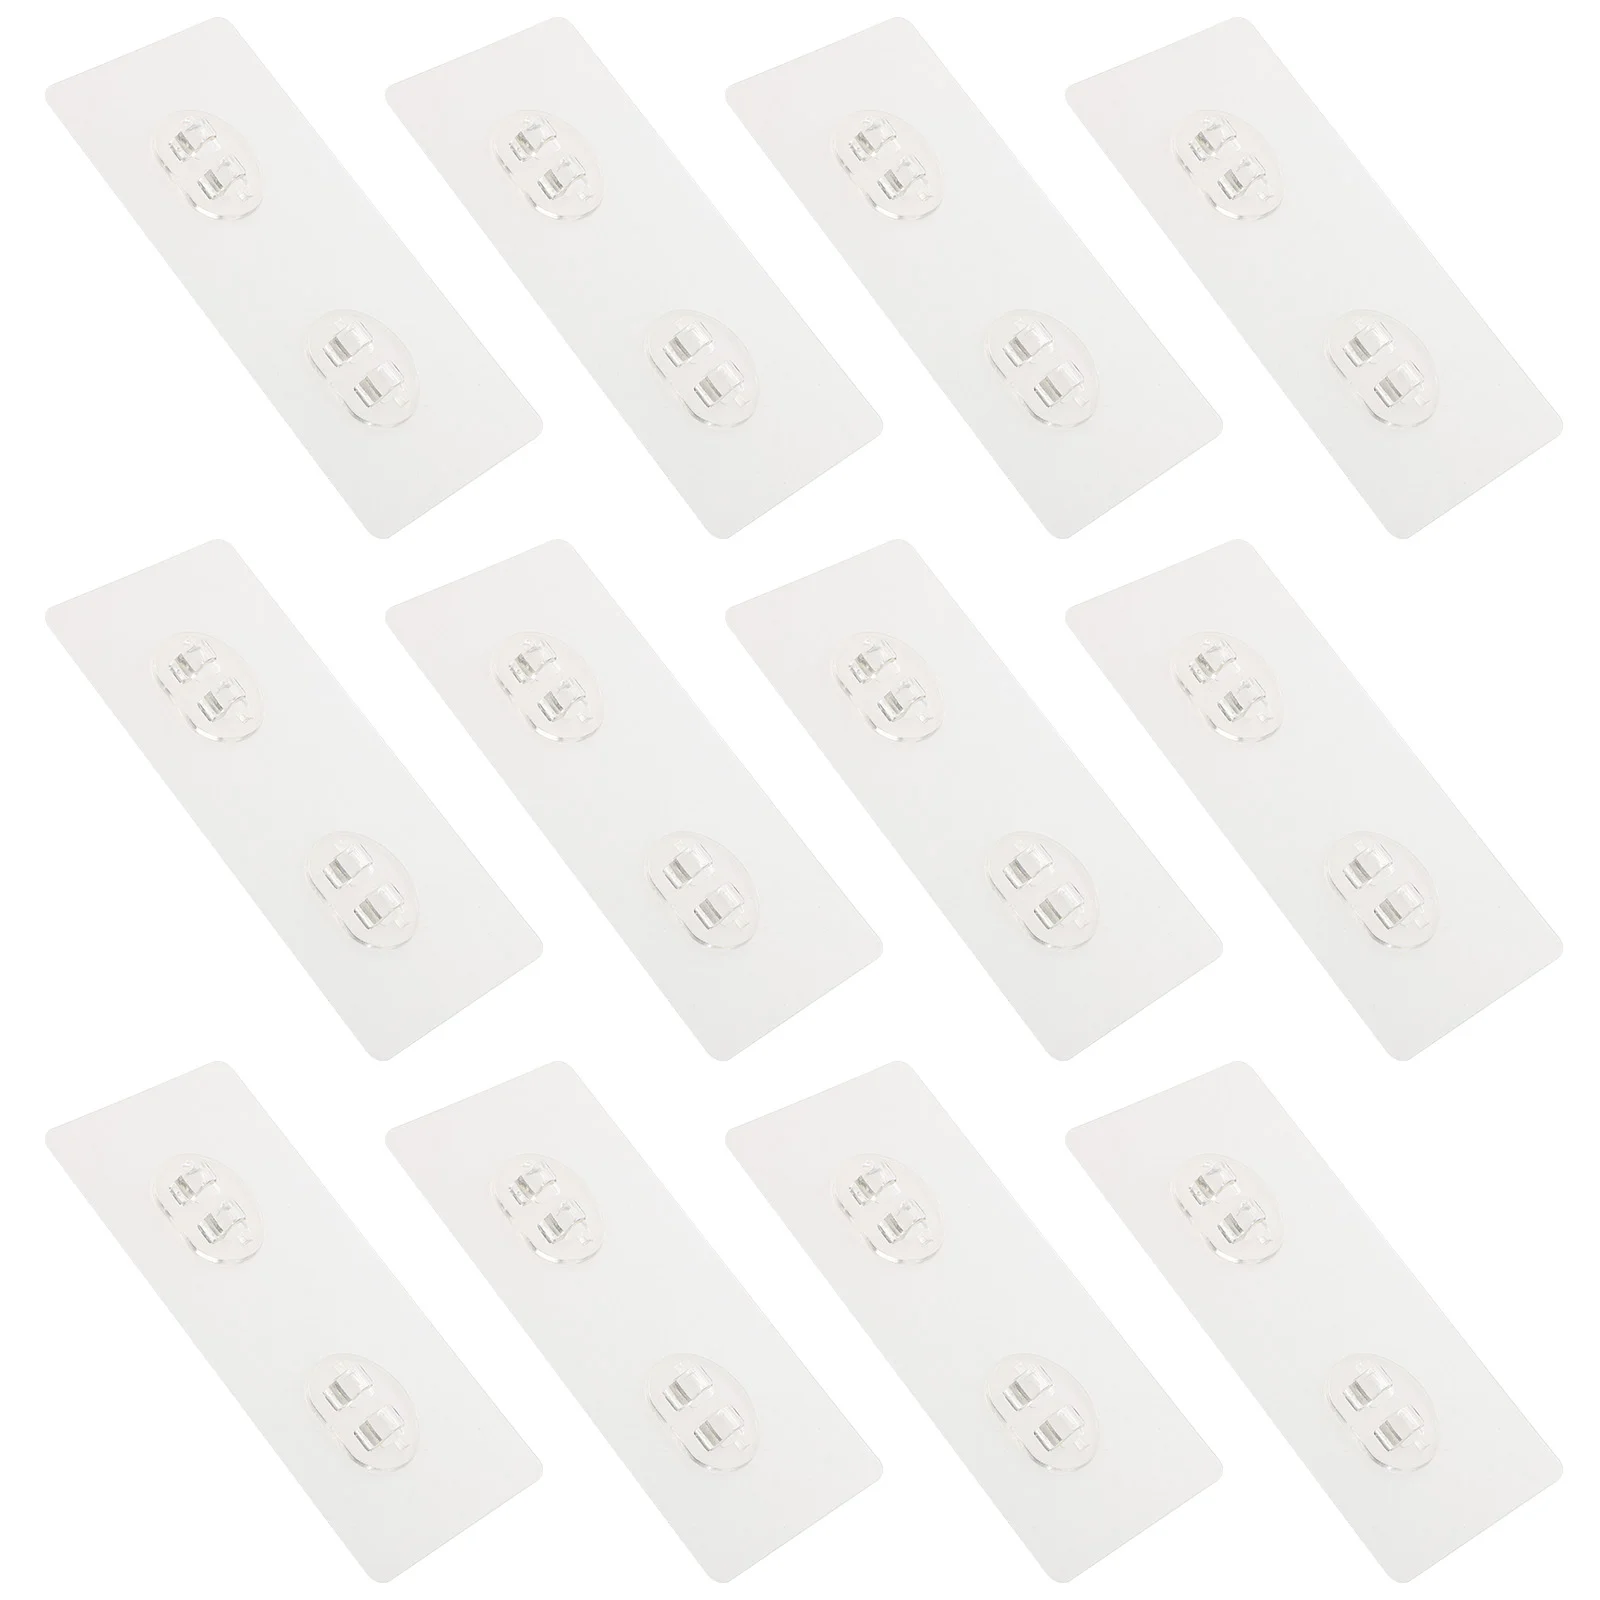 

12pcs Bathroom Stick On Hooks Shower Essentials Shower Adhesive Strips Wall Hooks For Hanging